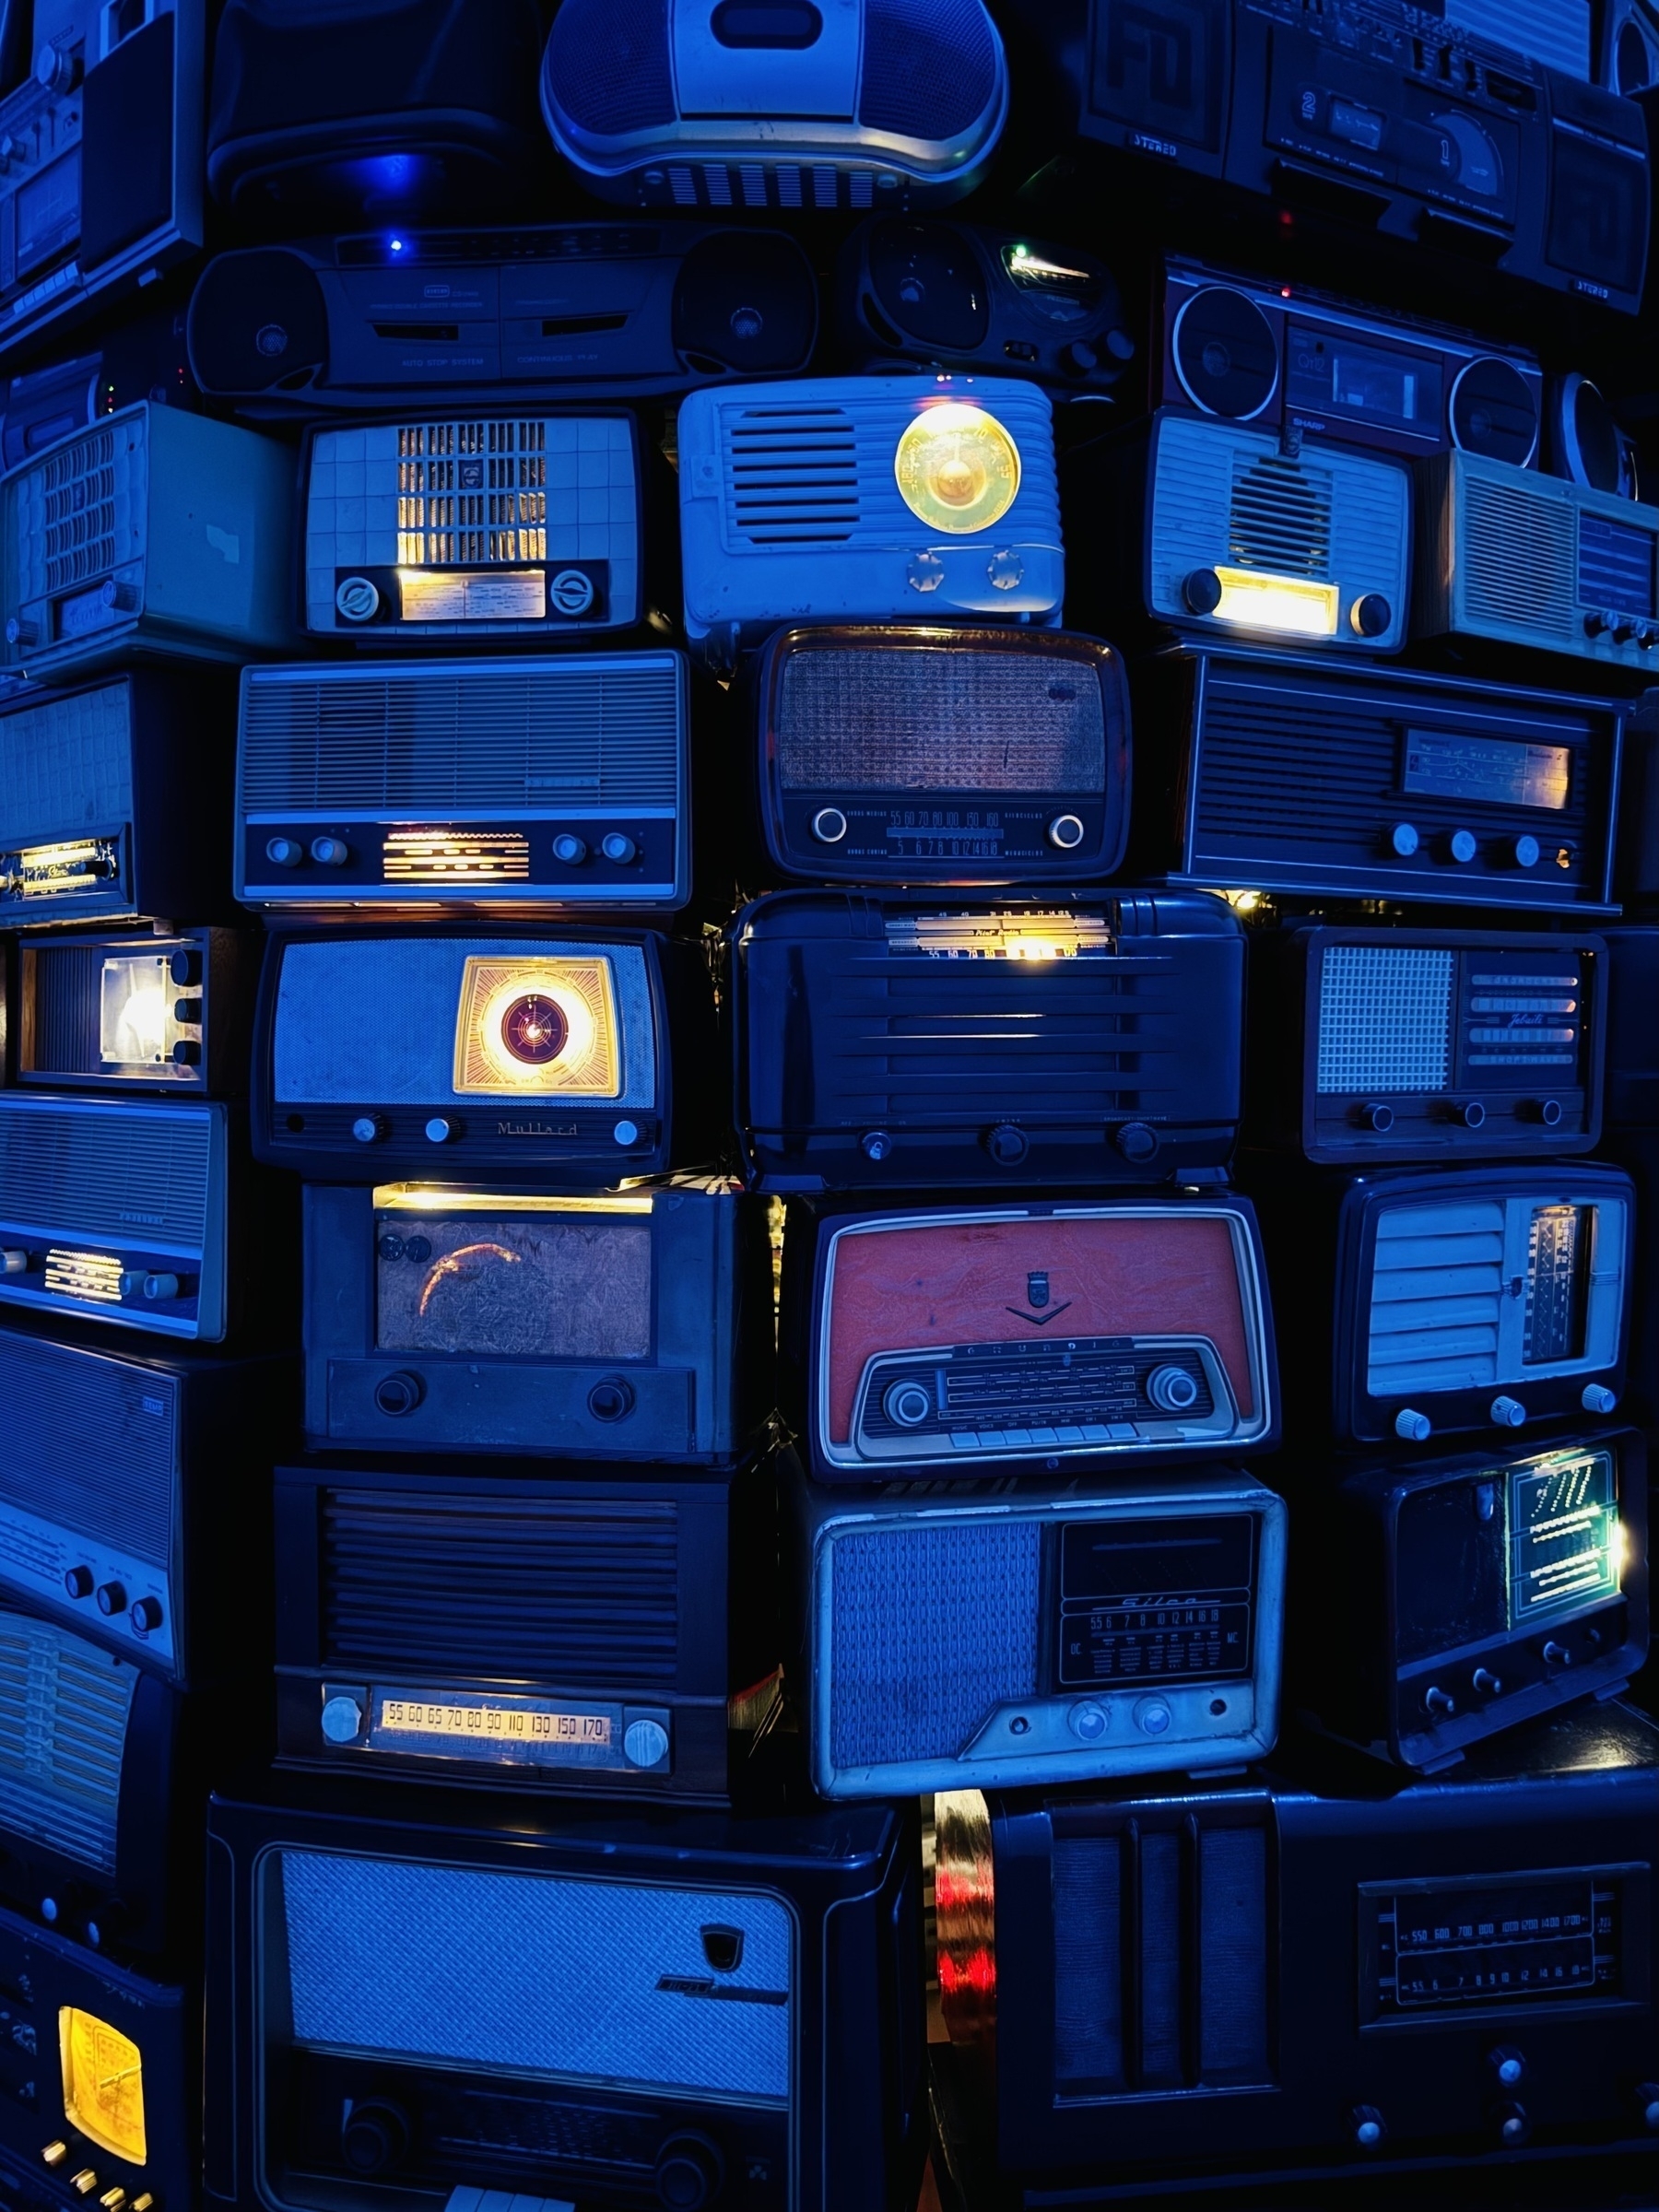 A collection of radios and tape decks stacked closely together and bathed in blue light.